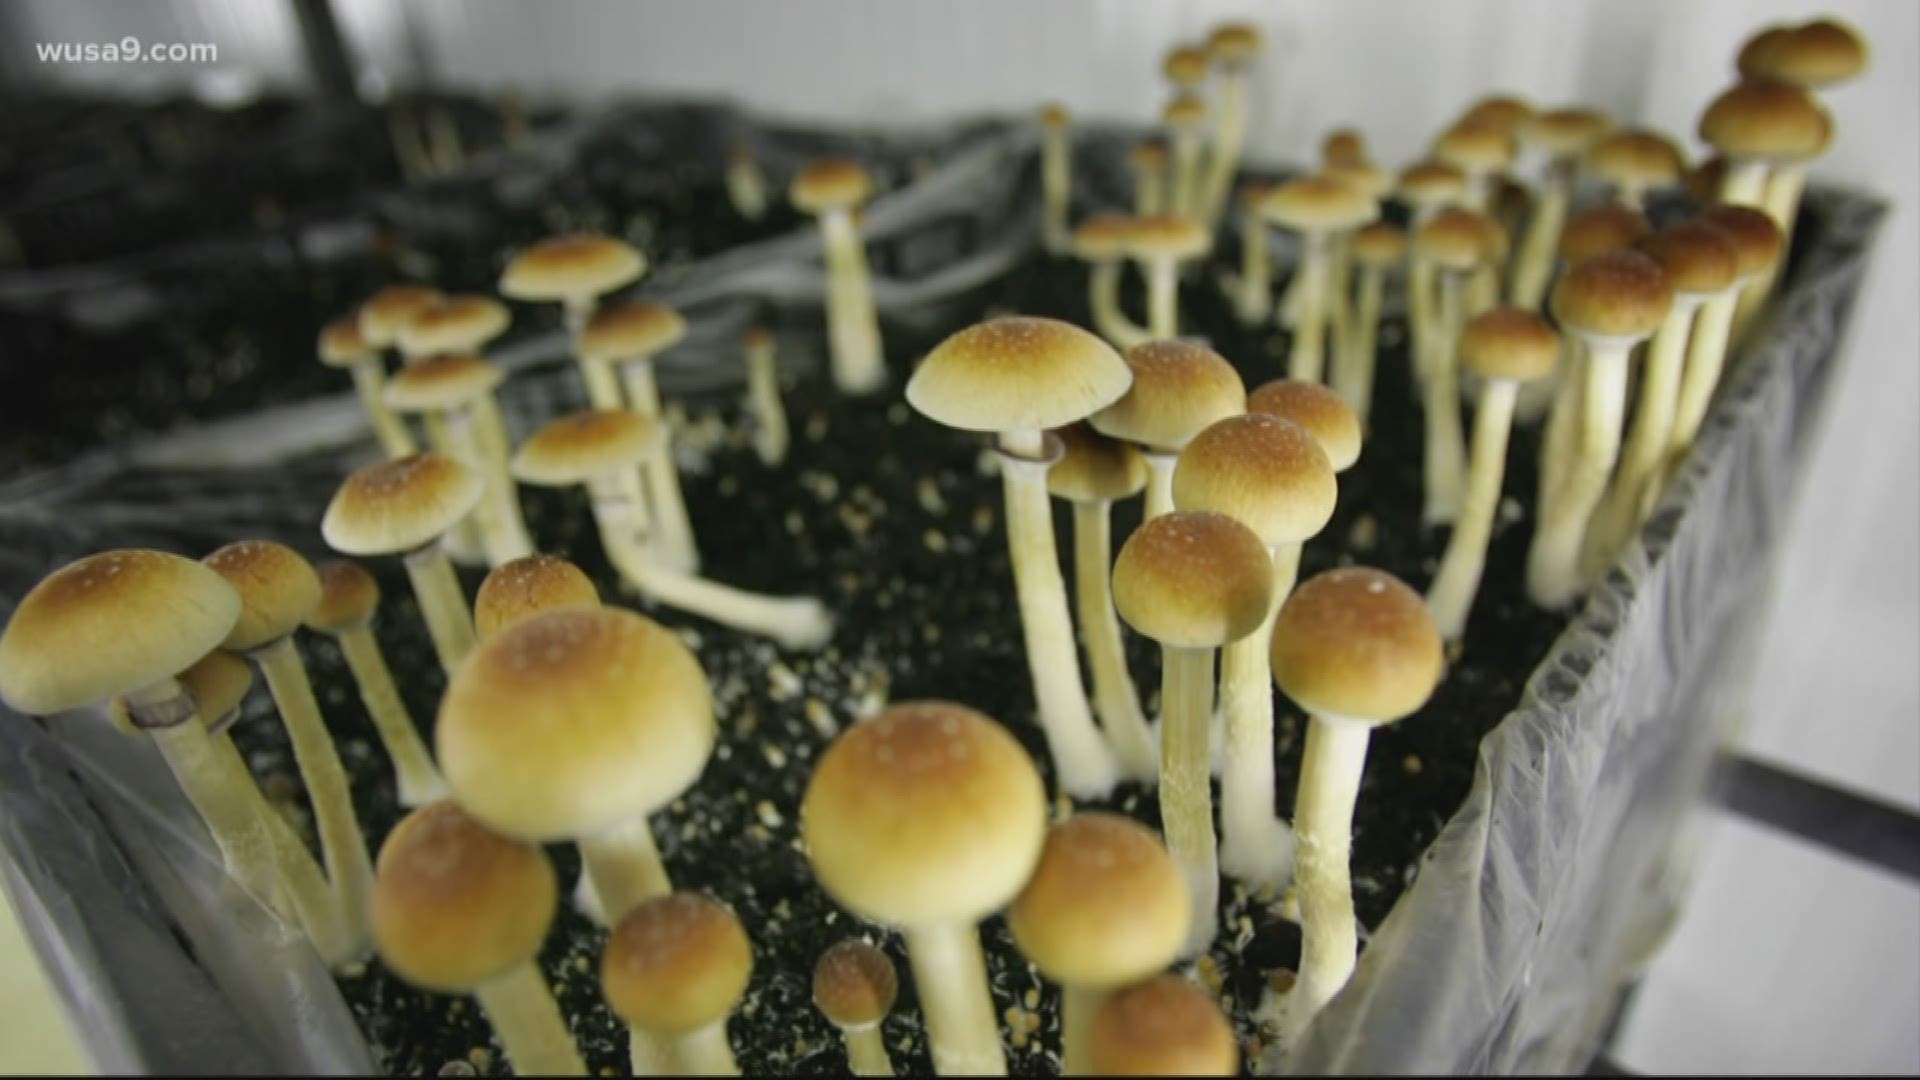 Elevate Your Encounter: Purchase the Greatest Shrooms in DC